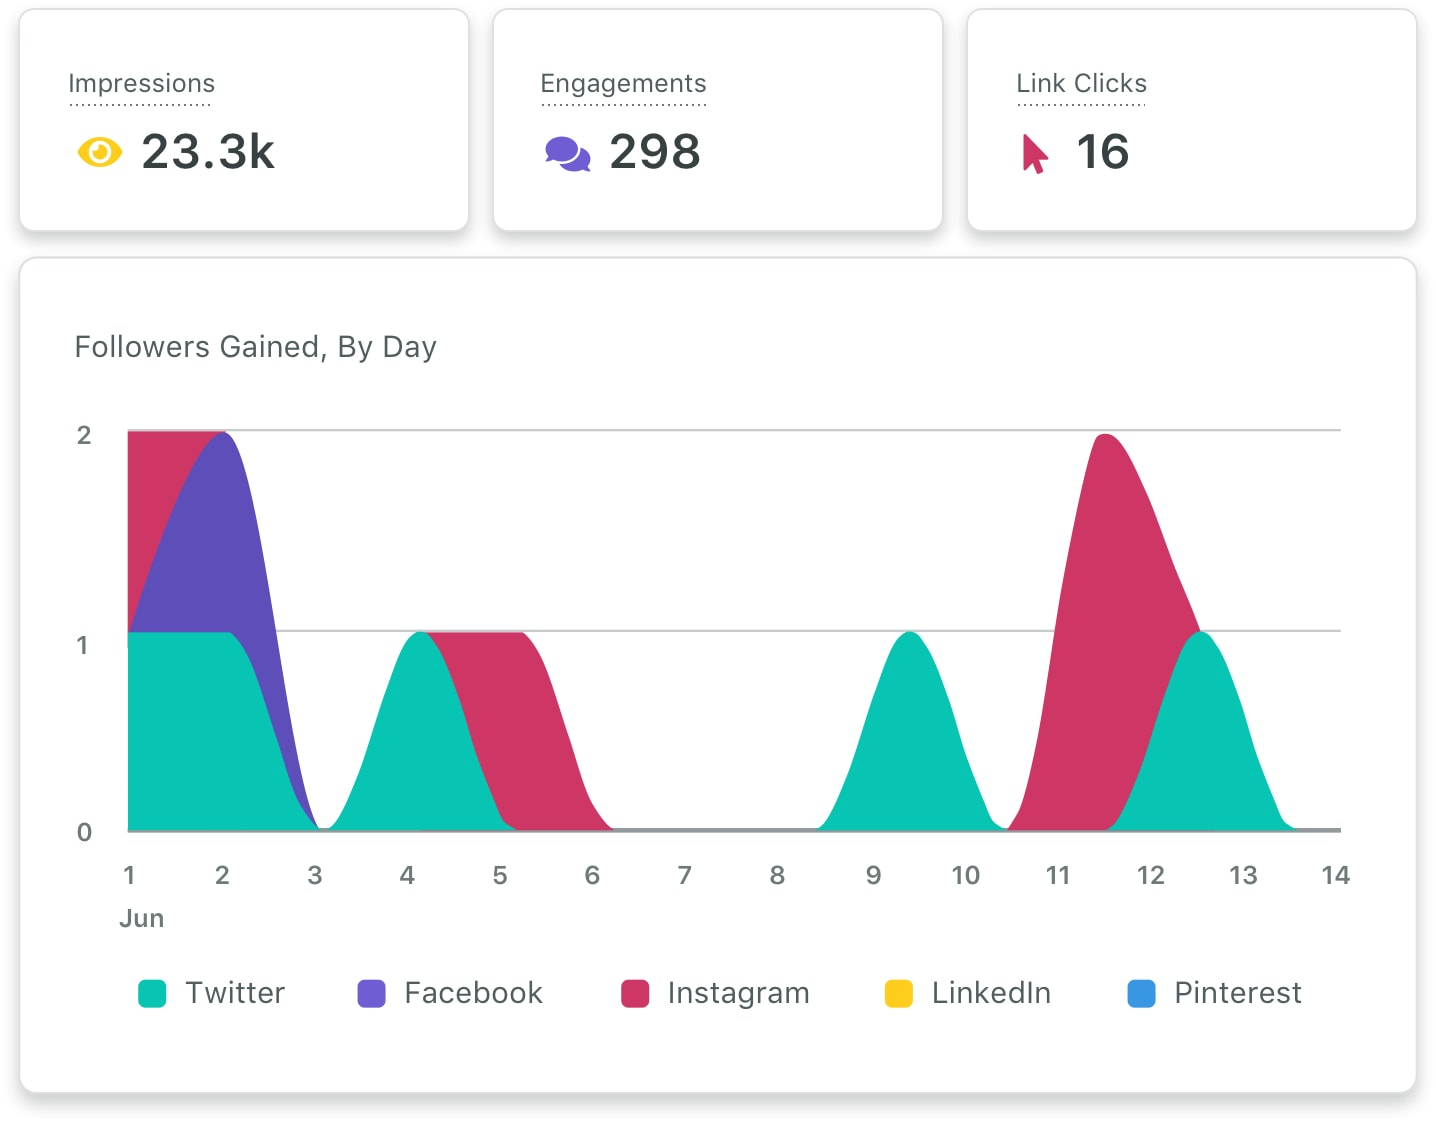 This chart shows figures about your content, such as how many times it has been shared, engaged with, or clicked. You can also observe your follower count across all of your linked platforms.